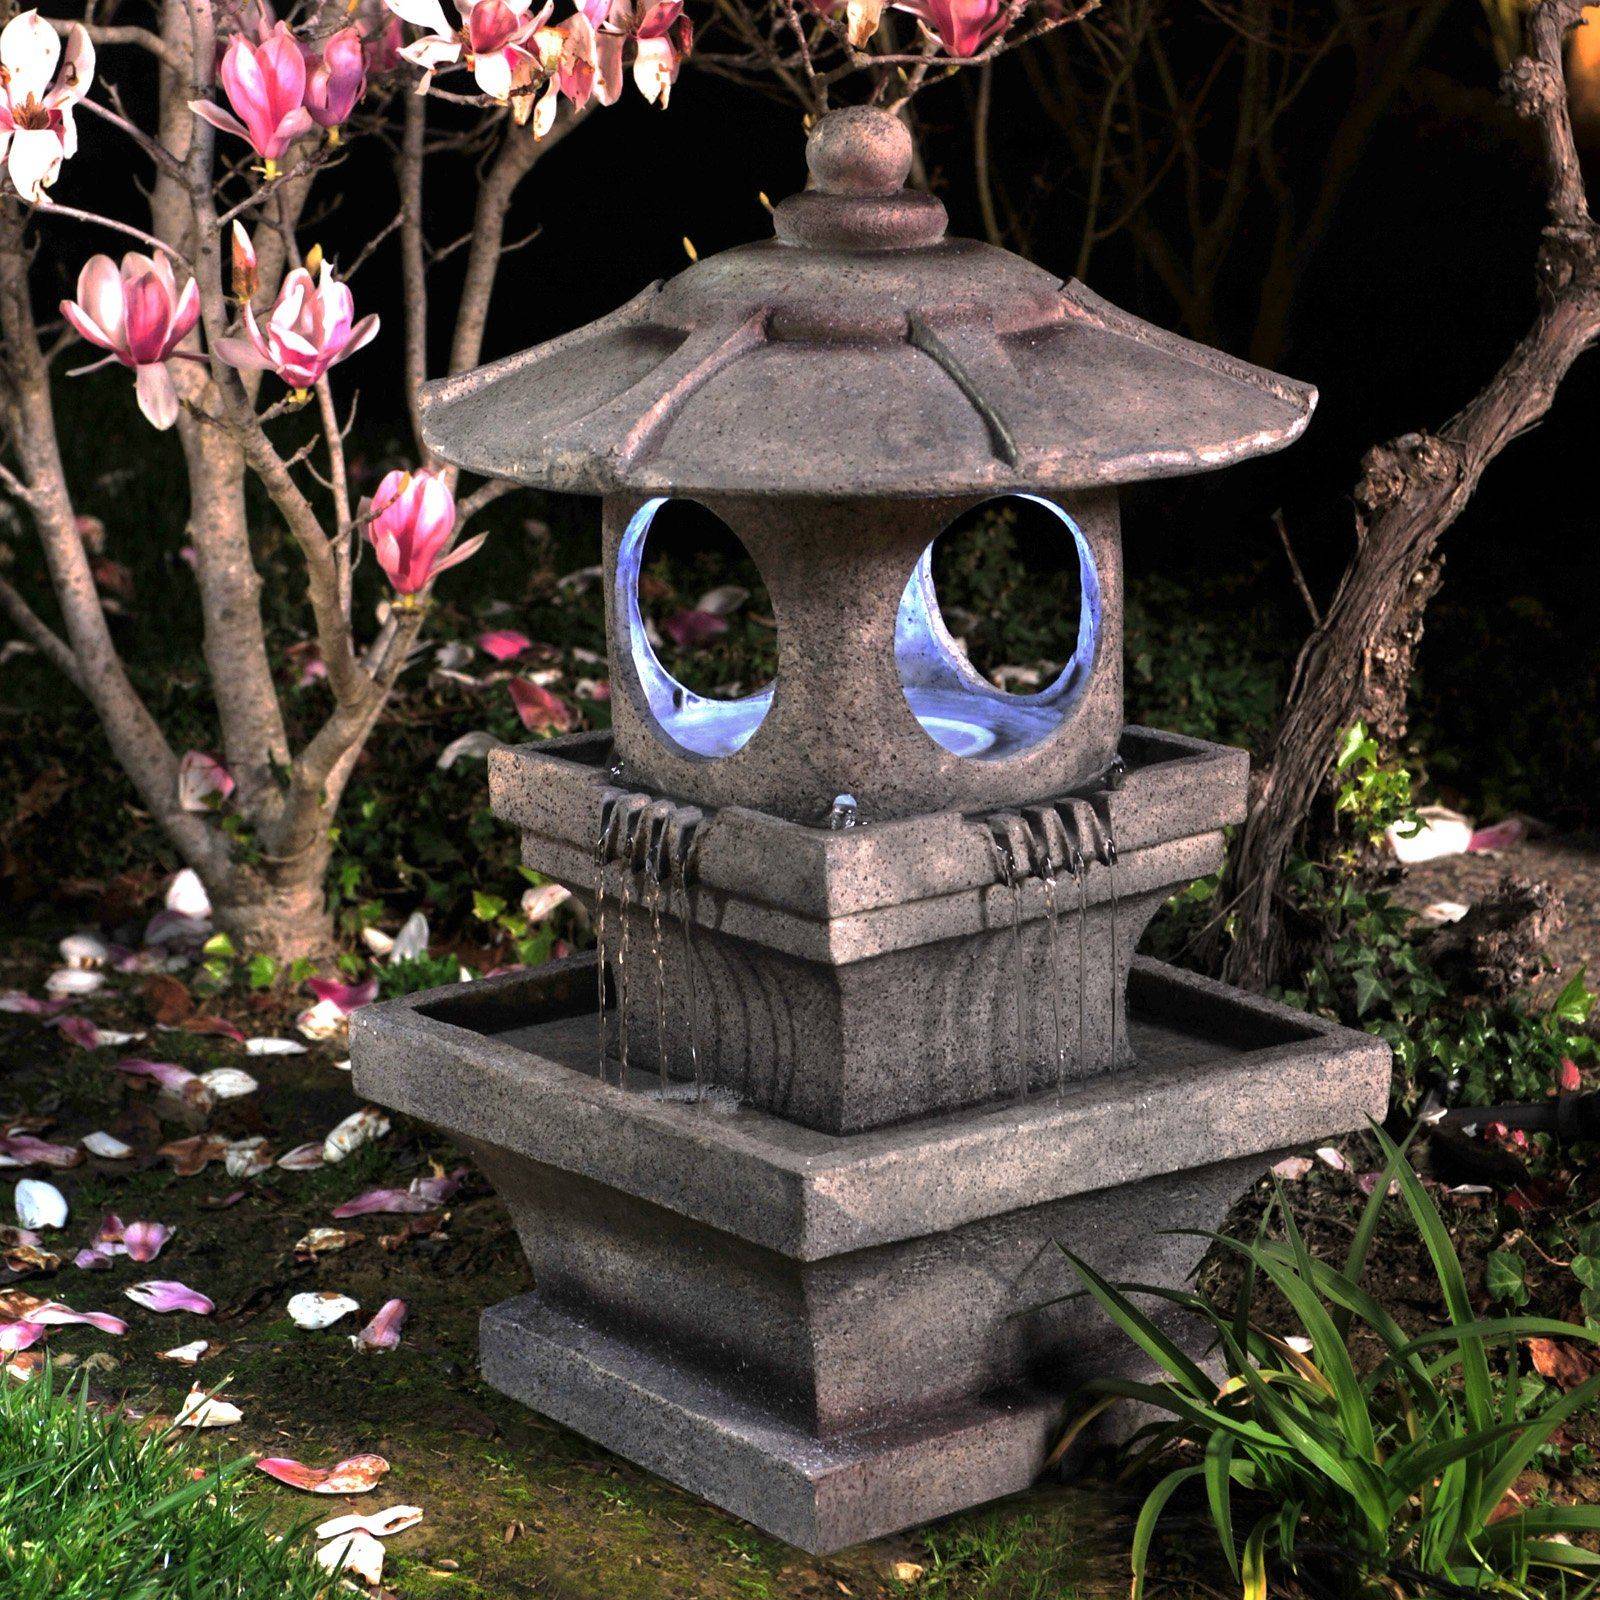 Japanese Water Feature